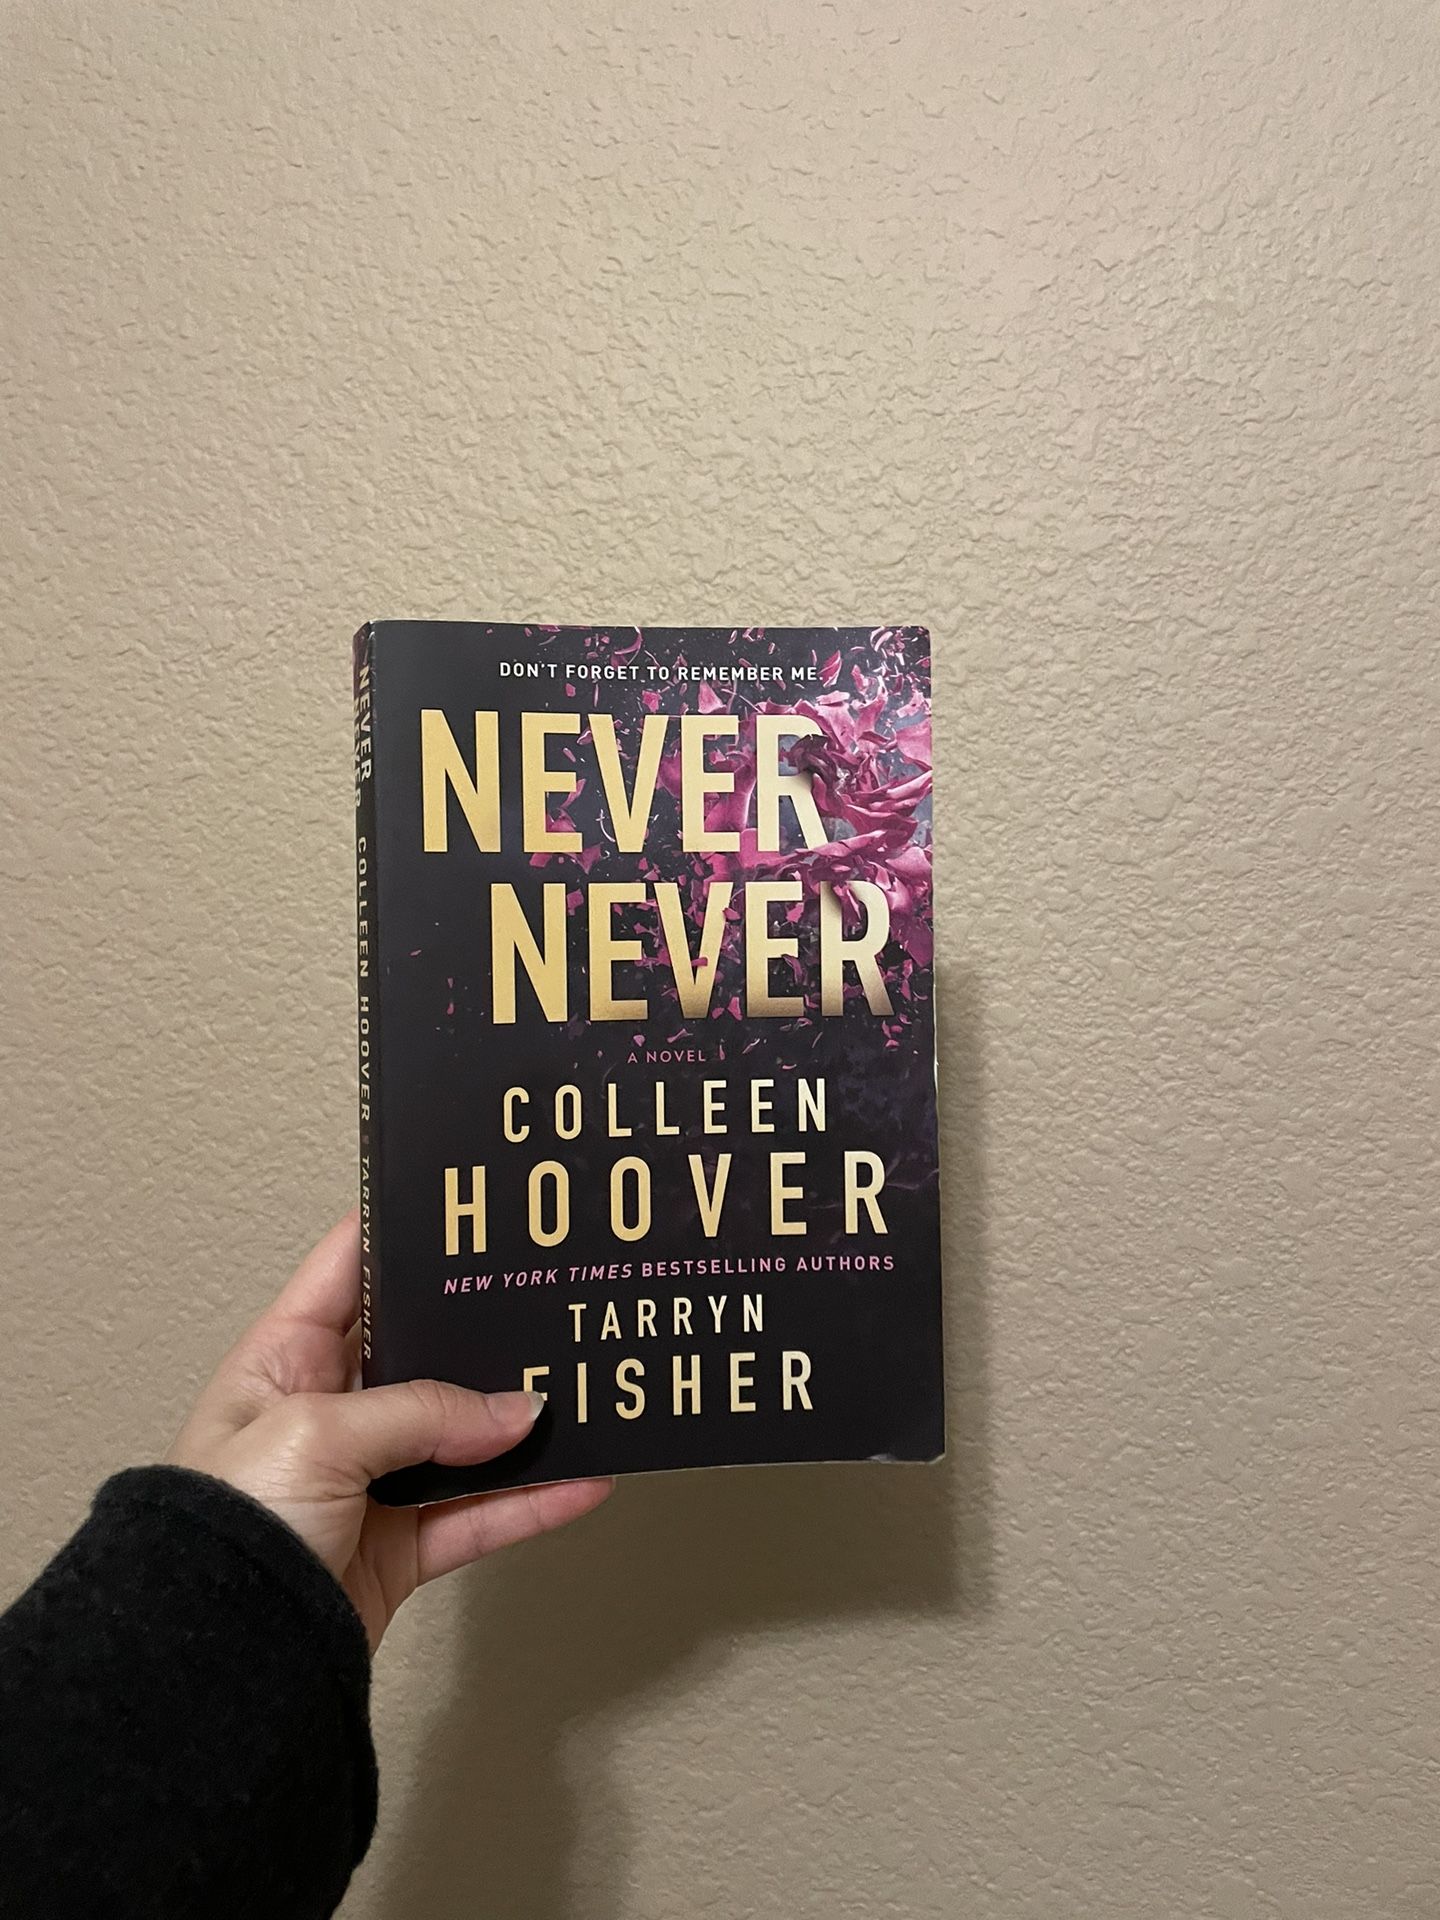 BOOK: “Never Never” by Colleen Hoover